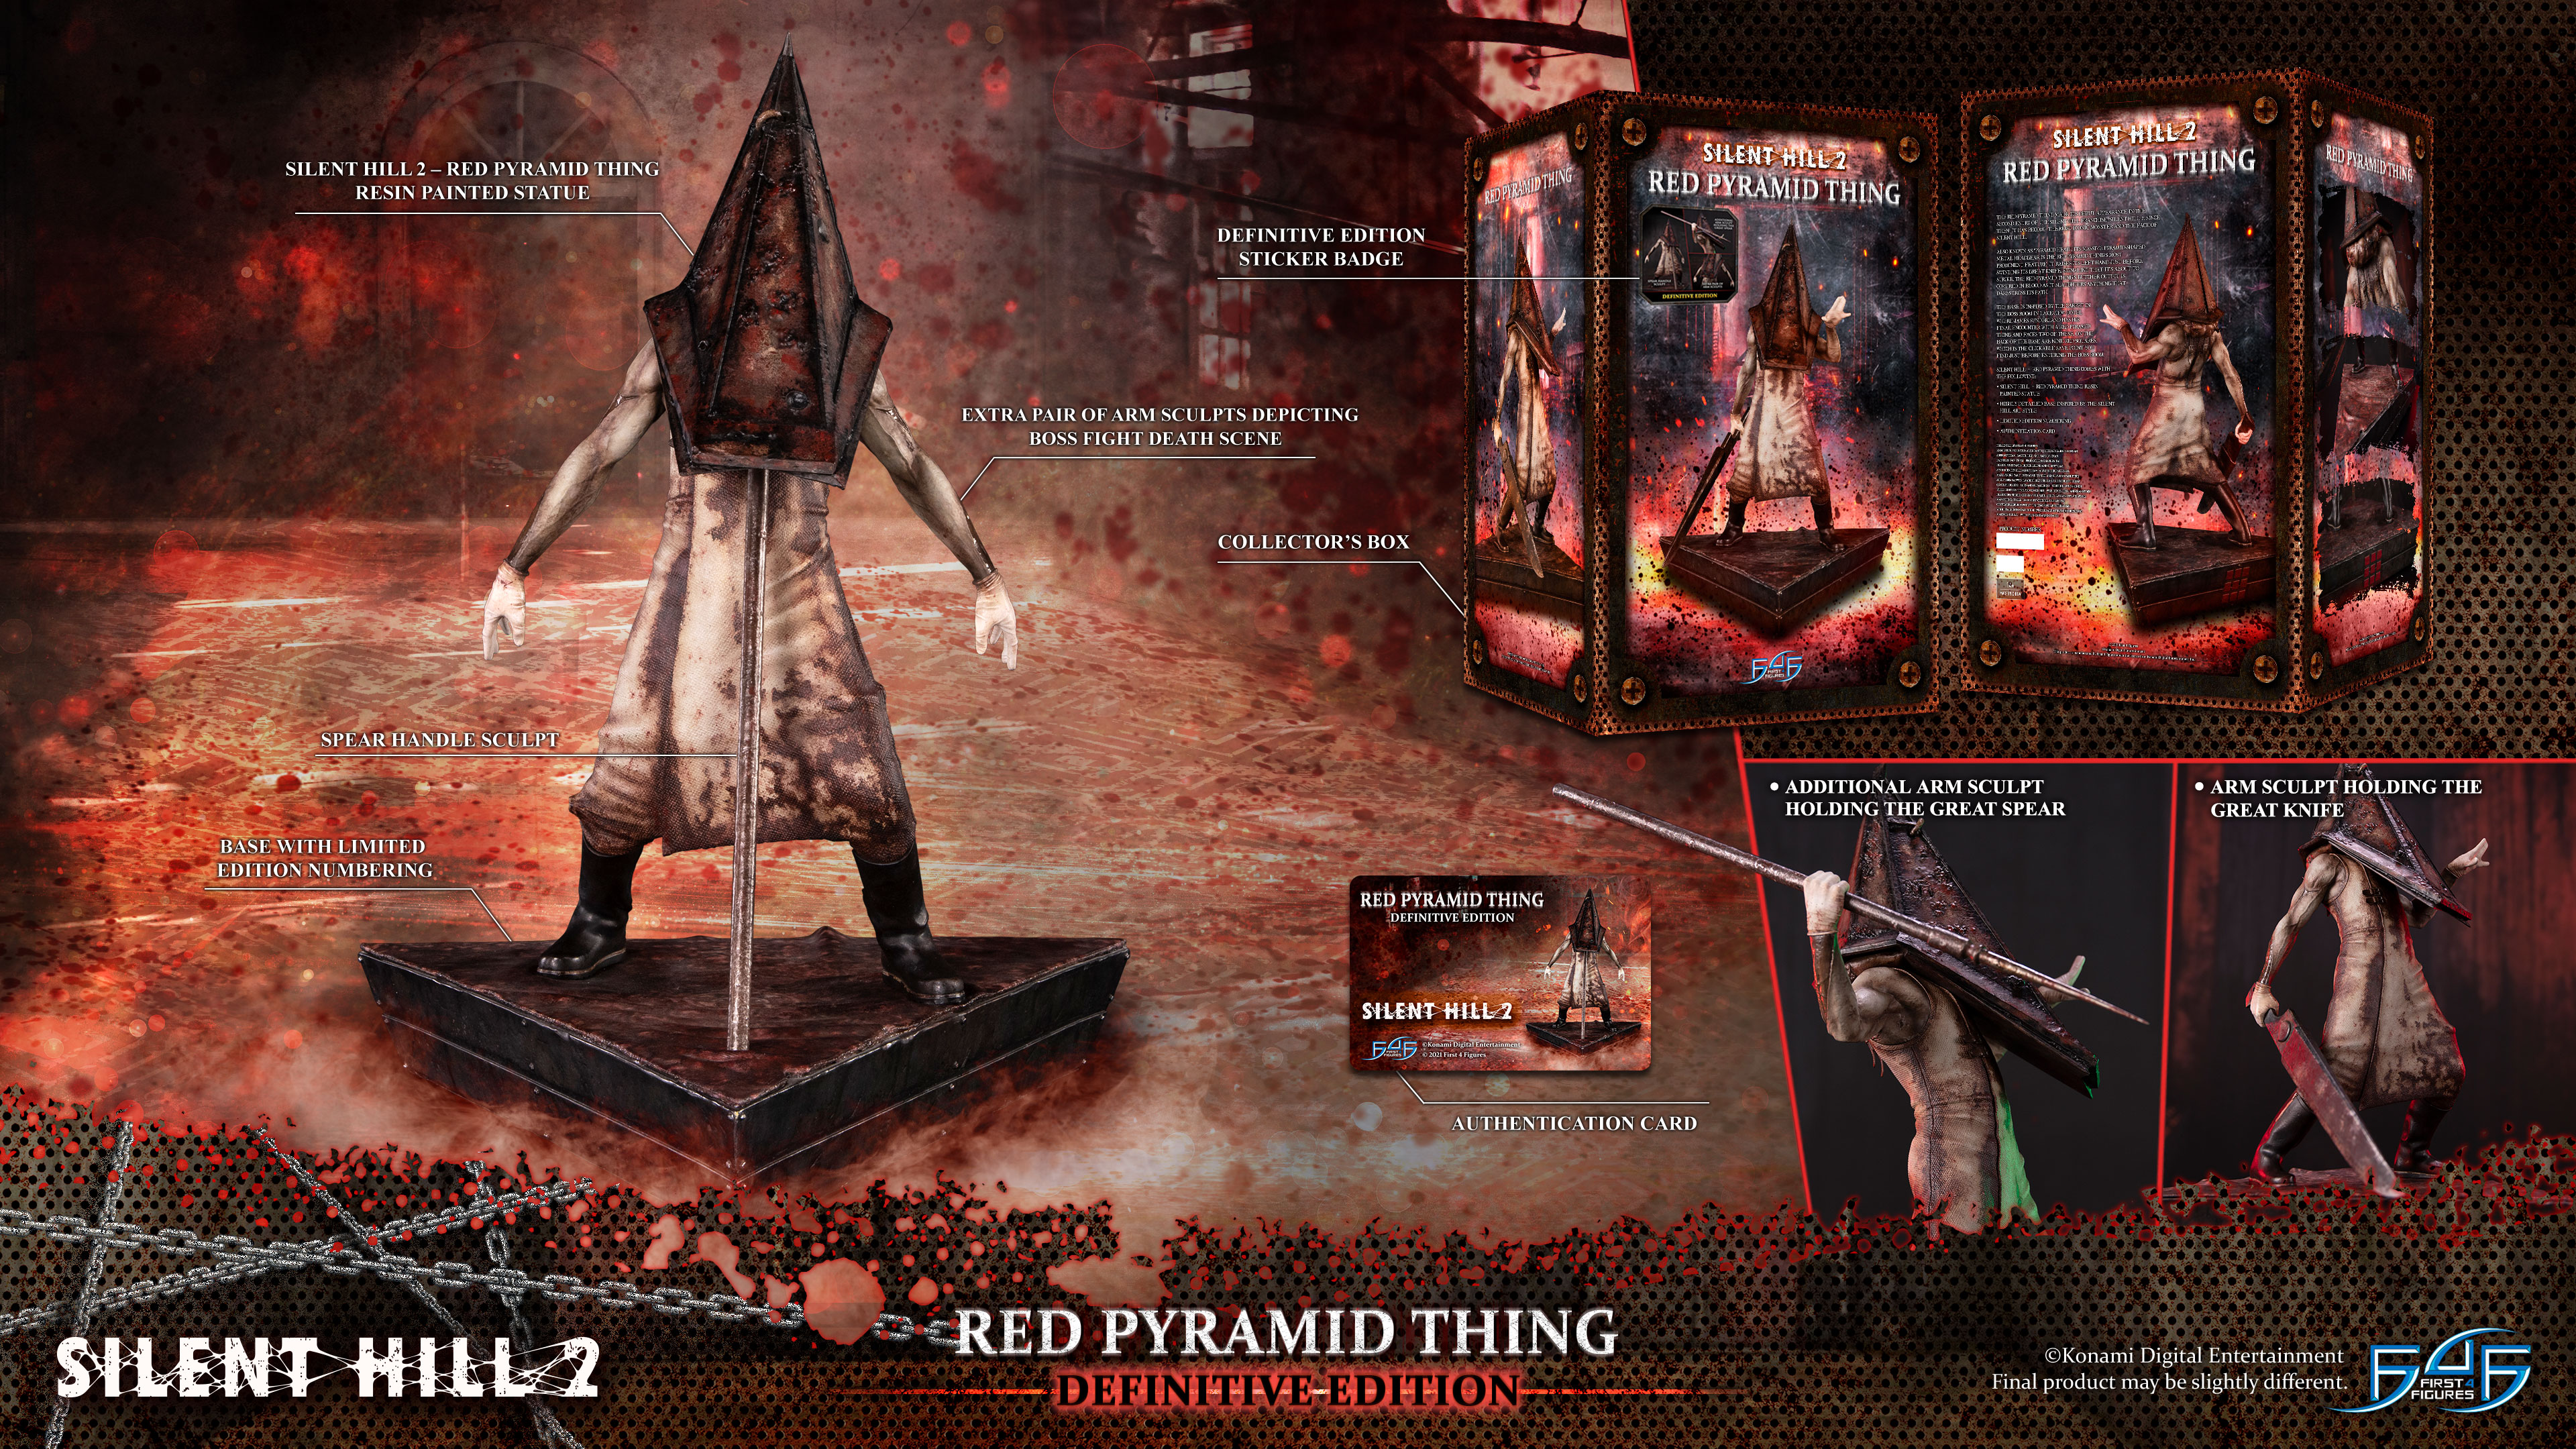 Red Pyramid Thing (Definitive Edition)